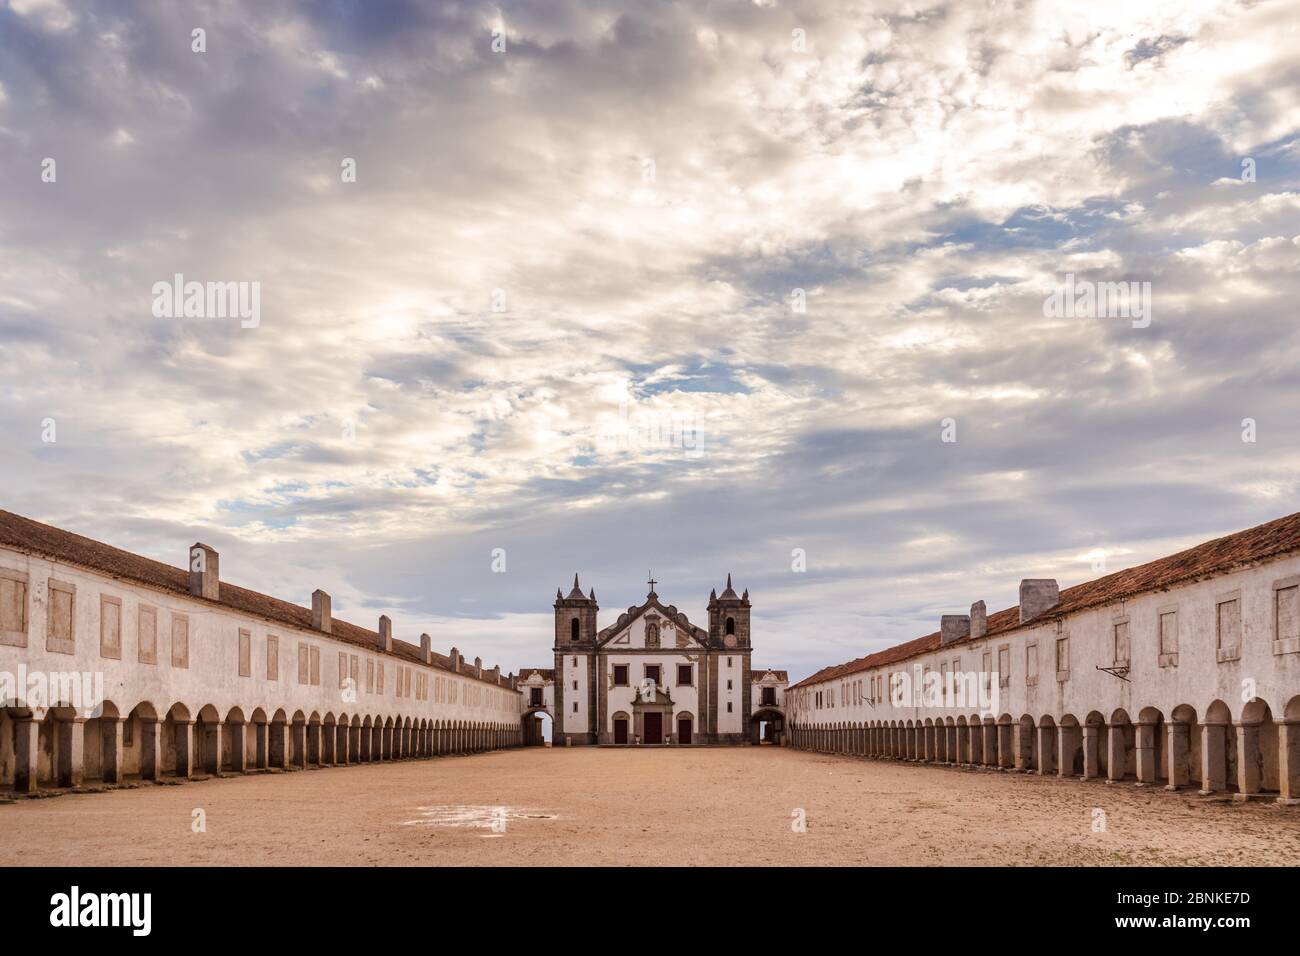 The Nossa Senhora do Cabo, Cabo Espichel, Sesimbra, Setubal peninsula, with its archs leading to the main building, on a cloudy day with sun shining Stock Photo